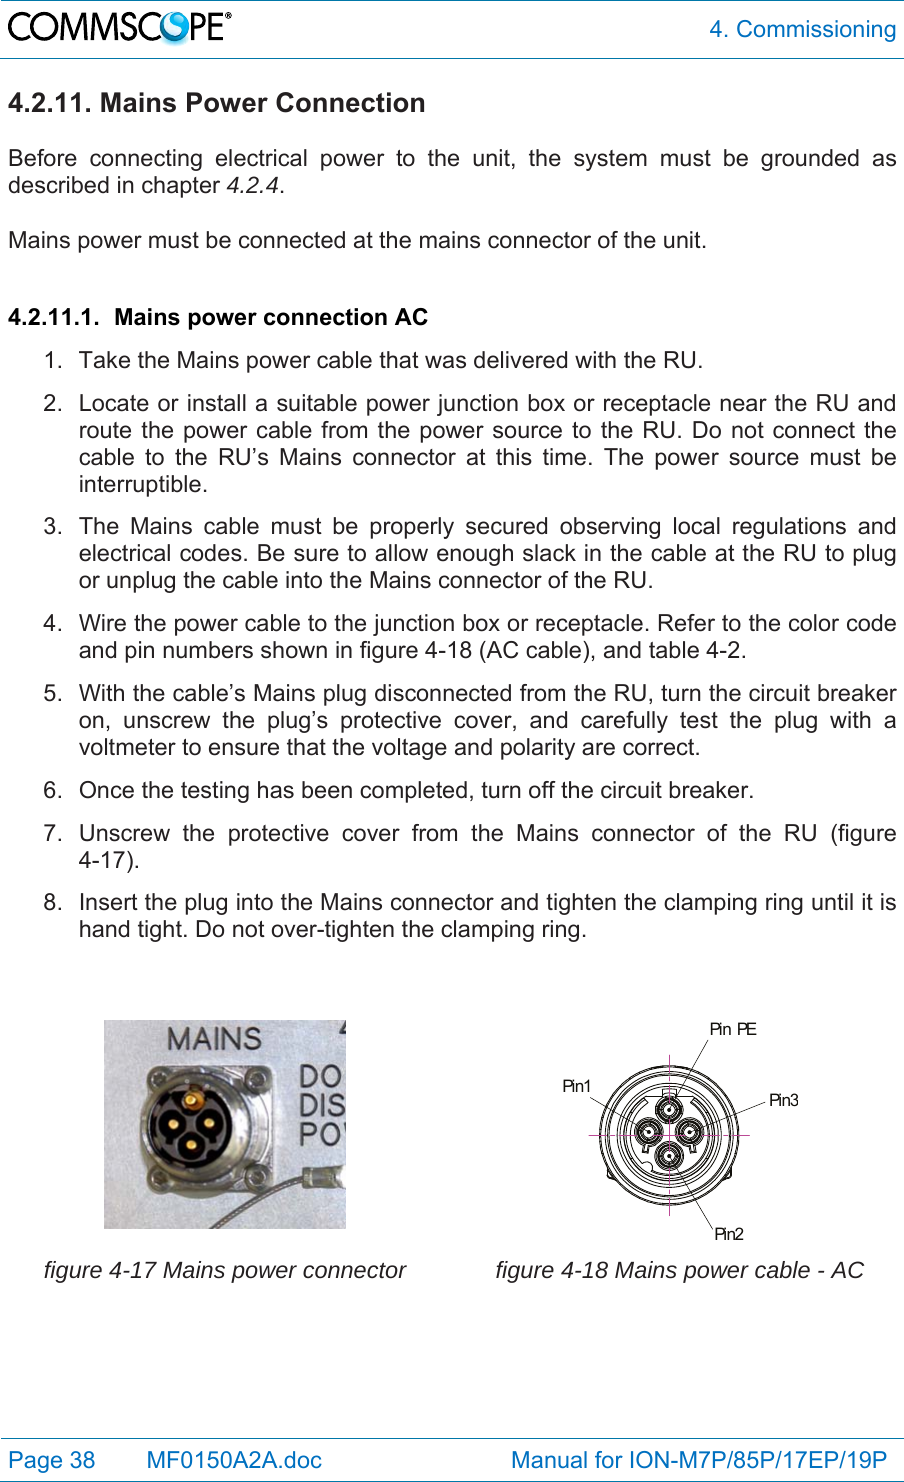  4. Commissioning Page 38   MF0150A2A.doc                             Manual for ION-M7P/85P/17EP/19P  4.2.11. Mains Power Connection  Before connecting electrical power to the unit, the system must be grounded as described in chapter 4.2.4.  Mains power must be connected at the mains connector of the unit.  4.2.11.1.  Mains power connection AC 1.  Take the Mains power cable that was delivered with the RU. 2.  Locate or install a suitable power junction box or receptacle near the RU and route the power cable from the power source to the RU. Do not connect the cable to the RU’s Mains connector at this time. The power source must be interruptible. 3.  The Mains cable must be properly secured observing local regulations and electrical codes. Be sure to allow enough slack in the cable at the RU to plug or unplug the cable into the Mains connector of the RU. 4.  Wire the power cable to the junction box or receptacle. Refer to the color code and pin numbers shown in figure 4-18 (AC cable), and table 4-2. 5.  With the cable’s Mains plug disconnected from the RU, turn the circuit breaker on, unscrew the plug’s protective cover, and carefully test the plug with a voltmeter to ensure that the voltage and polarity are correct. 6.  Once the testing has been completed, turn off the circuit breaker. 7.  Unscrew the protective cover from the Mains connector of the RU (figure 4-17). 8.  Insert the plug into the Mains connector and tighten the clamping ring until it is hand tight. Do not over-tighten the clamping ring.    Pin PEPin1Pin2Pin3 figure 4-17 Mains power connector  figure 4-18 Mains power cable - AC  